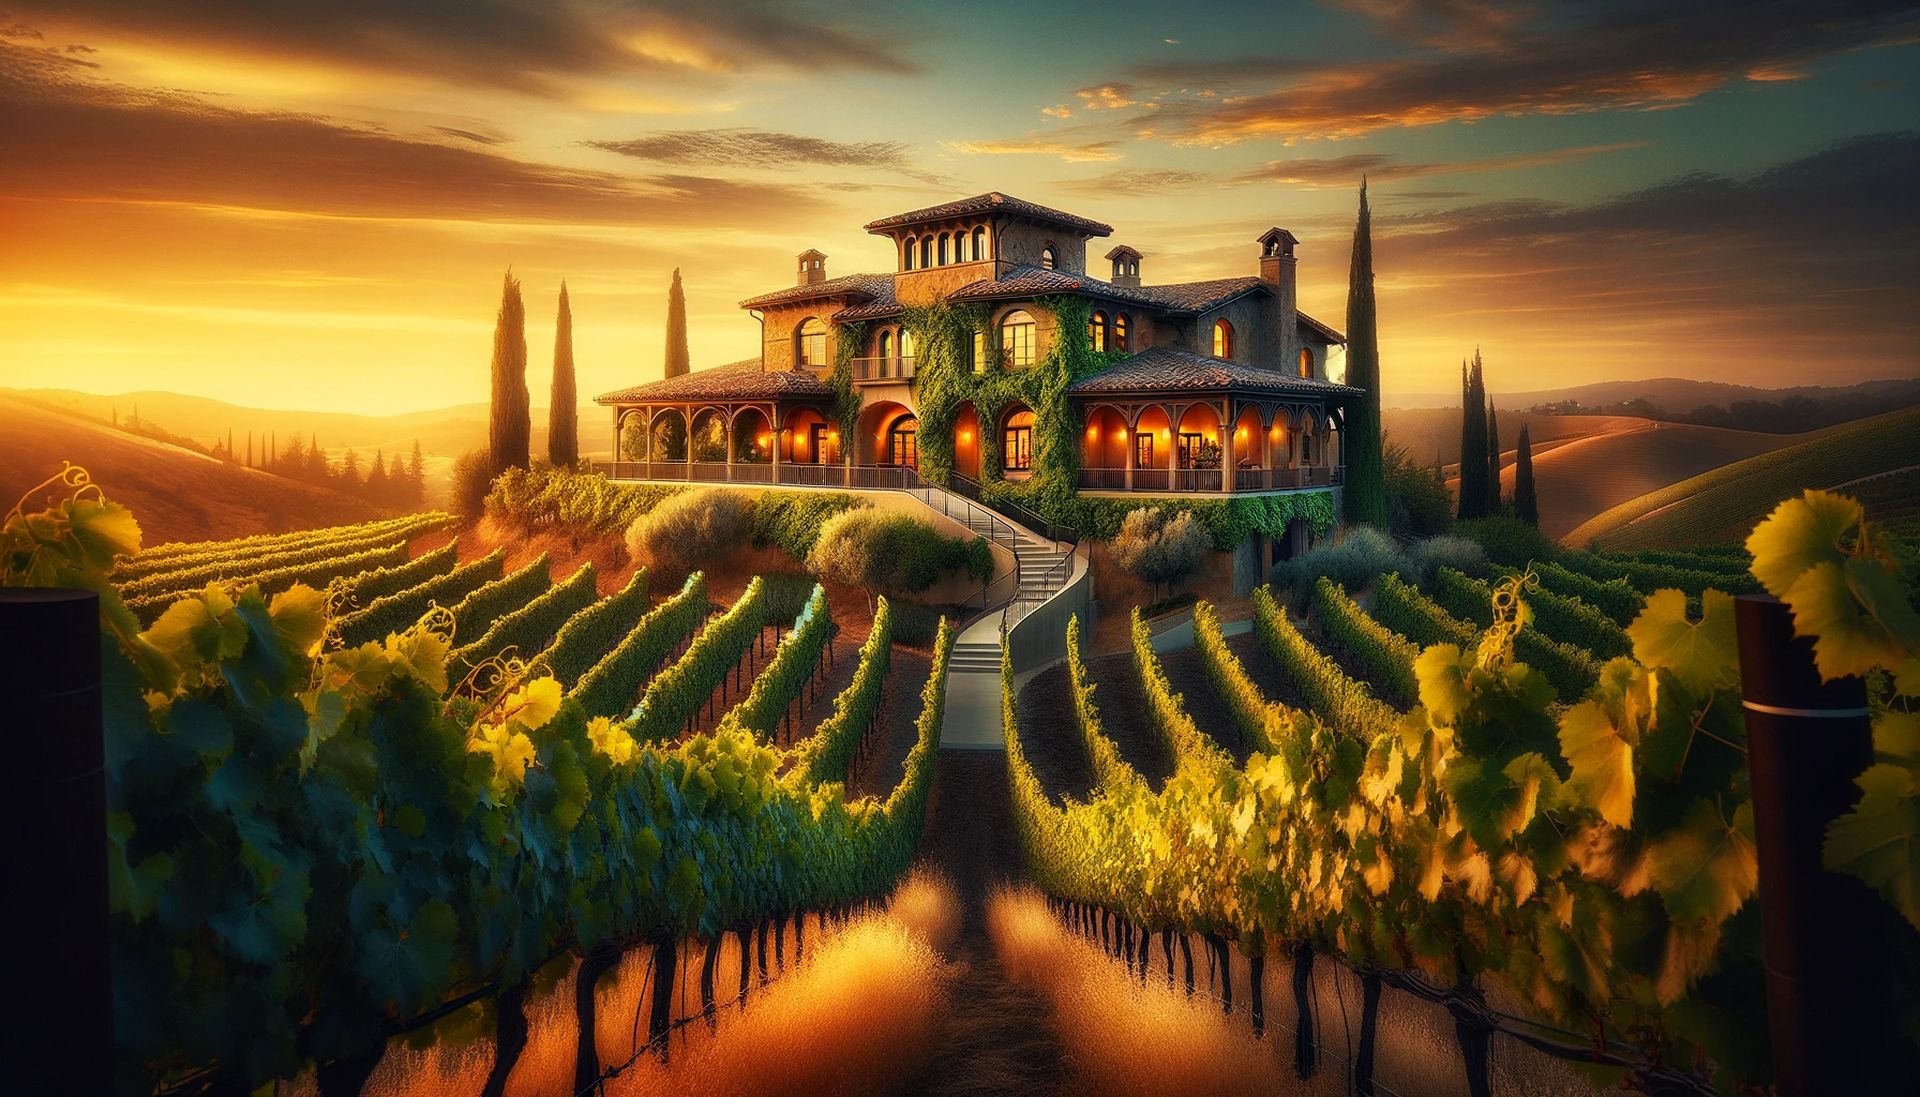 The enchanting essence of Black Stallion Estate Winery, surrounded by rolling vineyards. The image should depict the Tuscan-inspired architect.